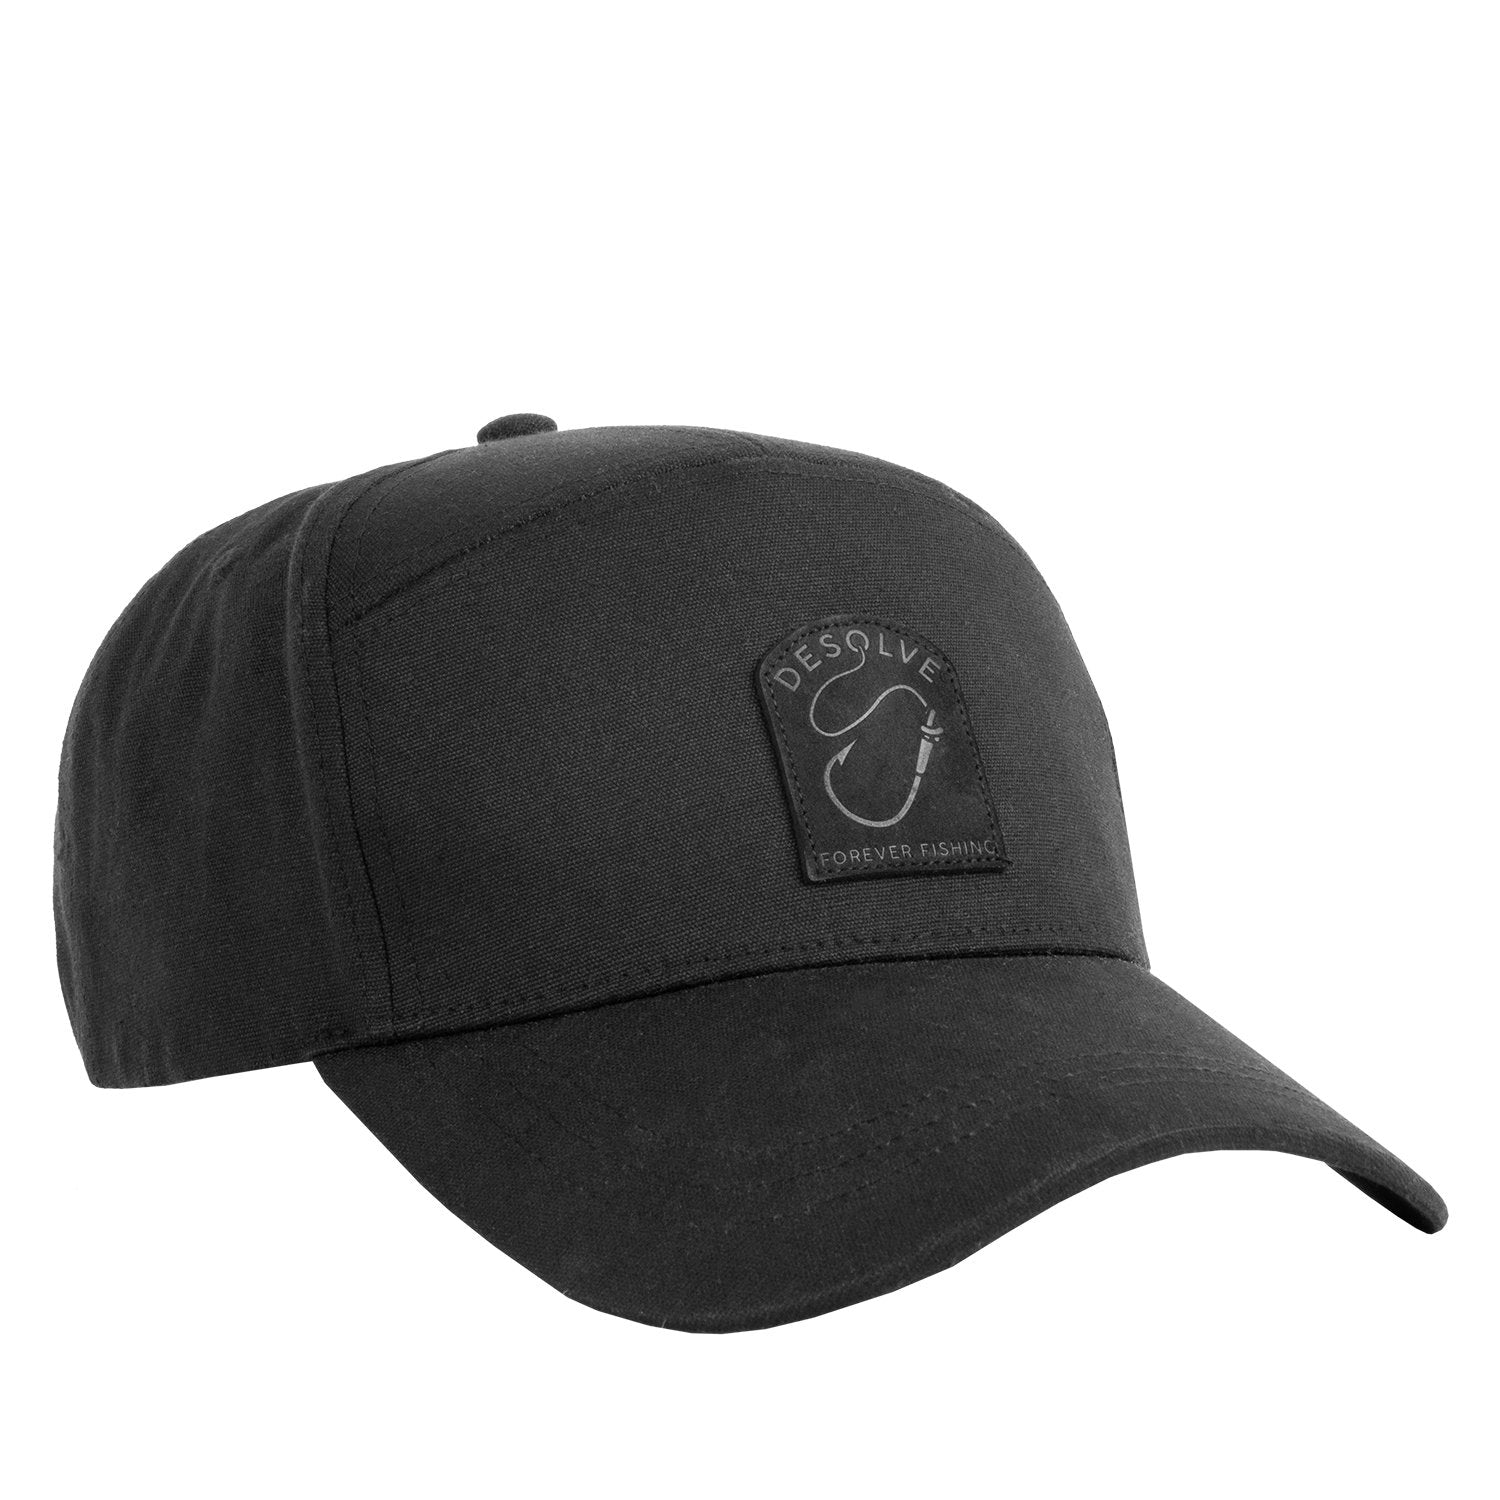 Desolve Supply Co, Saltwater Fiends Dad Hat, 100% Poly Cotton, One Size  Fits Most, Fishing Hat, Mens - Desolve Supply Co.